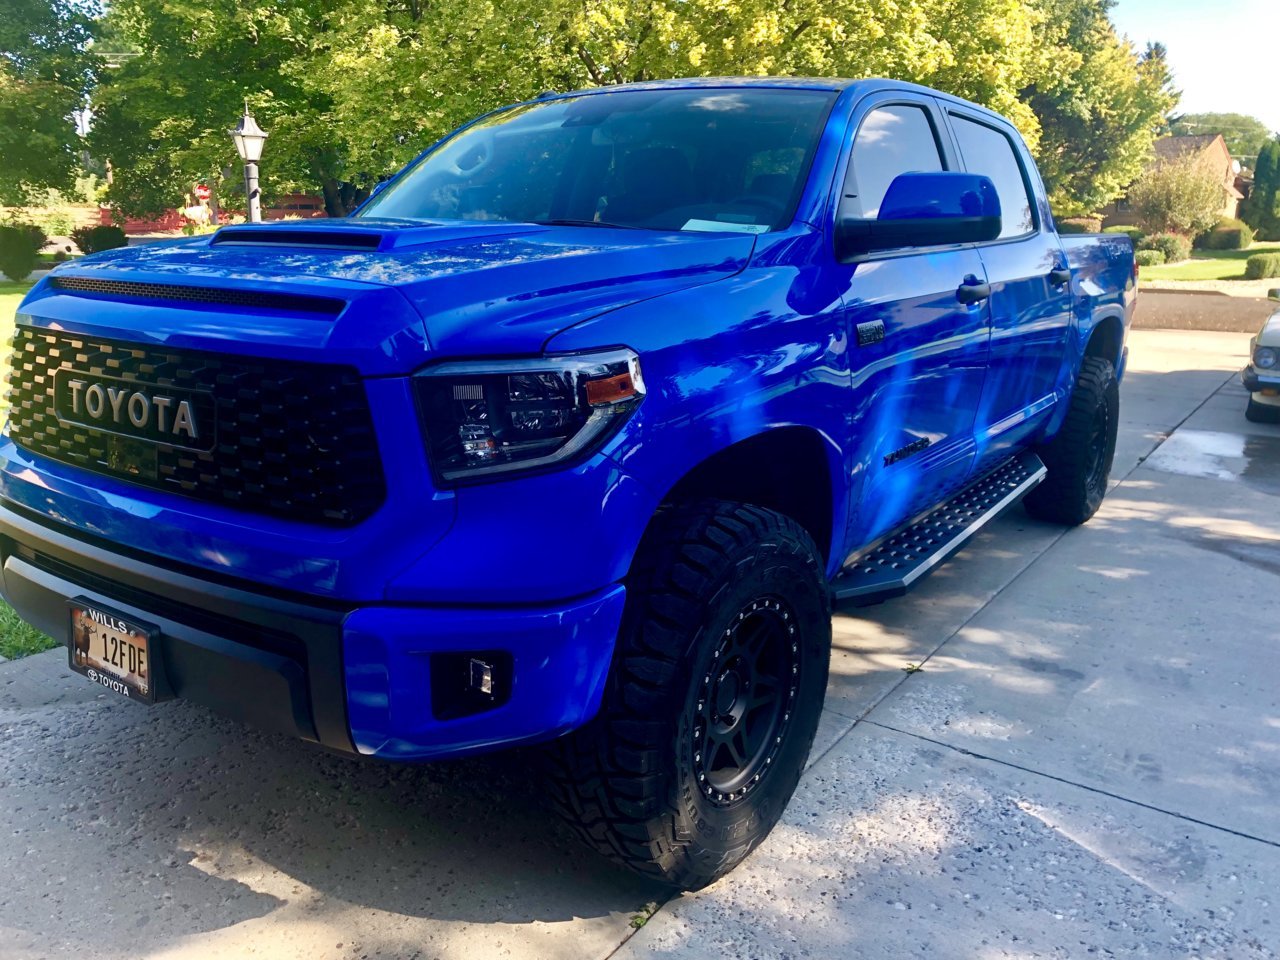 Let's see your VOODOO BLUE Tundra! | Toyota Tundra Forum